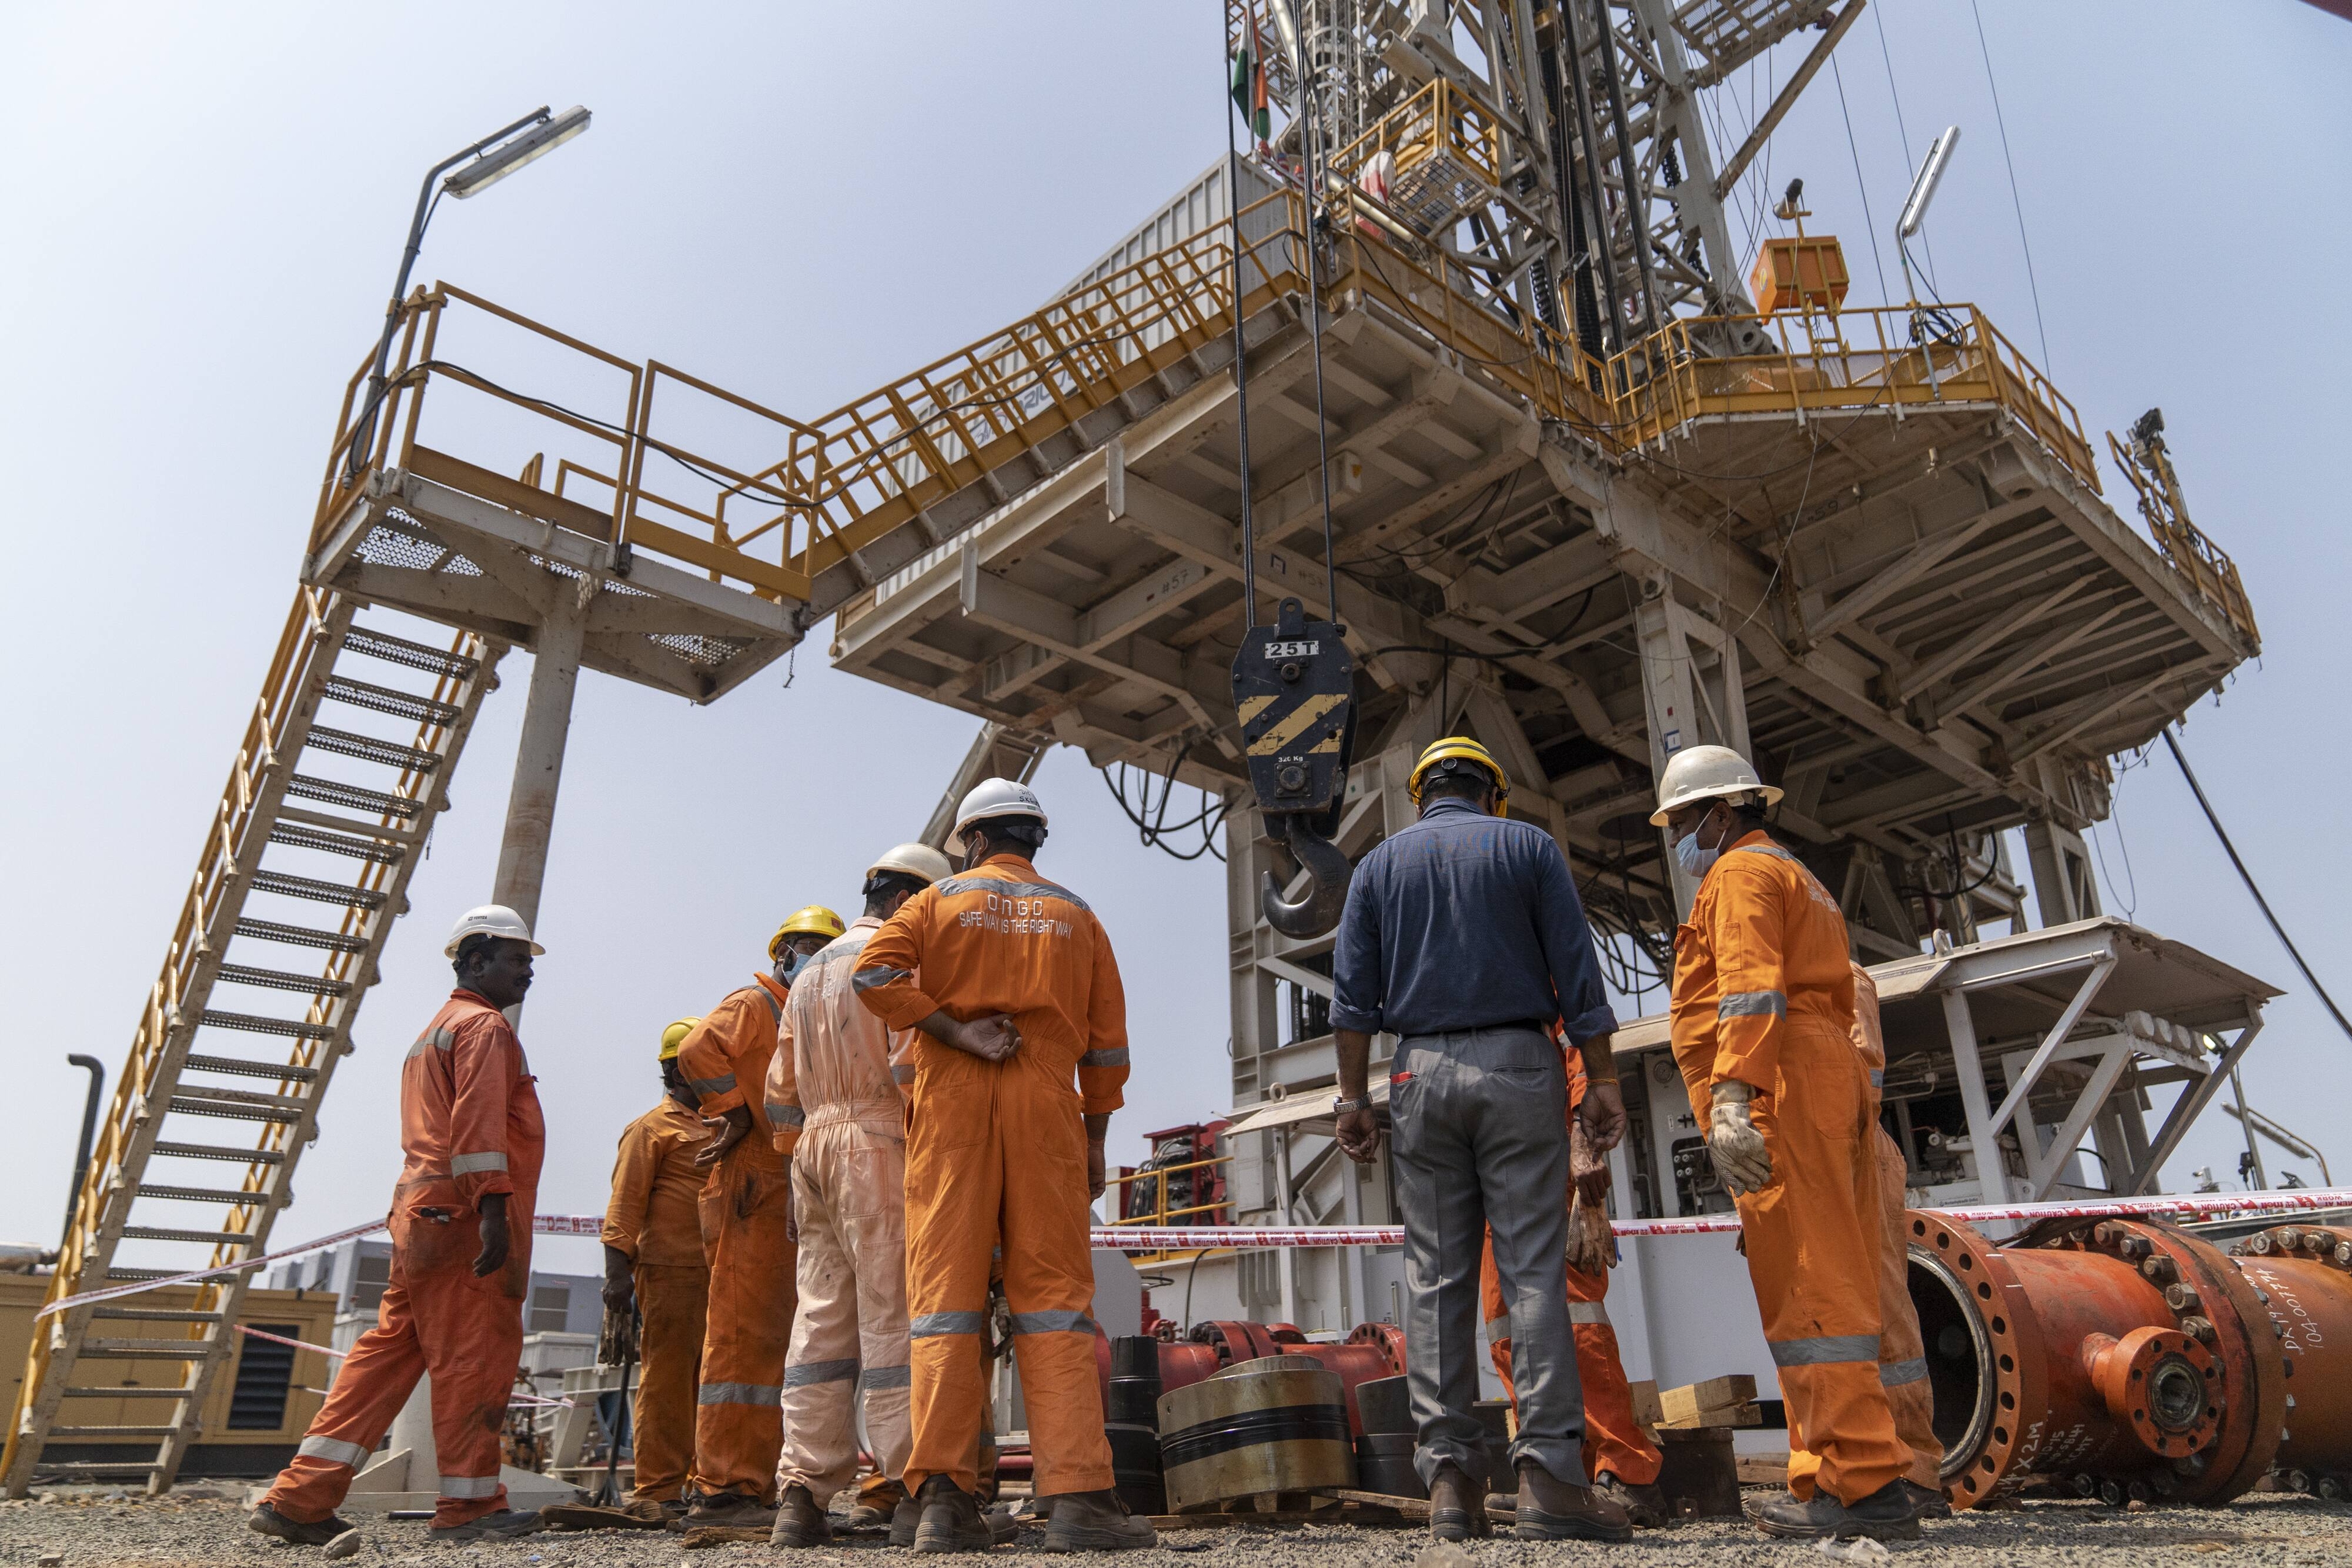 ONGC: The brokerage expects ONGC to post a 157.5 percent rise in its net profit at  <span class='webrupee'>₹</span>12,260 crore in Q4FY22. It has a 'buy' call on the stock with a target price of  <span class='webrupee'>₹</span>240, indicating an upside of 43 percent. MOSL expects net realizations to grow by 76 percent YoY led by an increase in crude oil prices. Gas production from the KG Basin remains crucial and any further delays could dampen near-term sentiment, it added. Outlook for various field developments remain key for volume growth going forward, noted the brokerage.